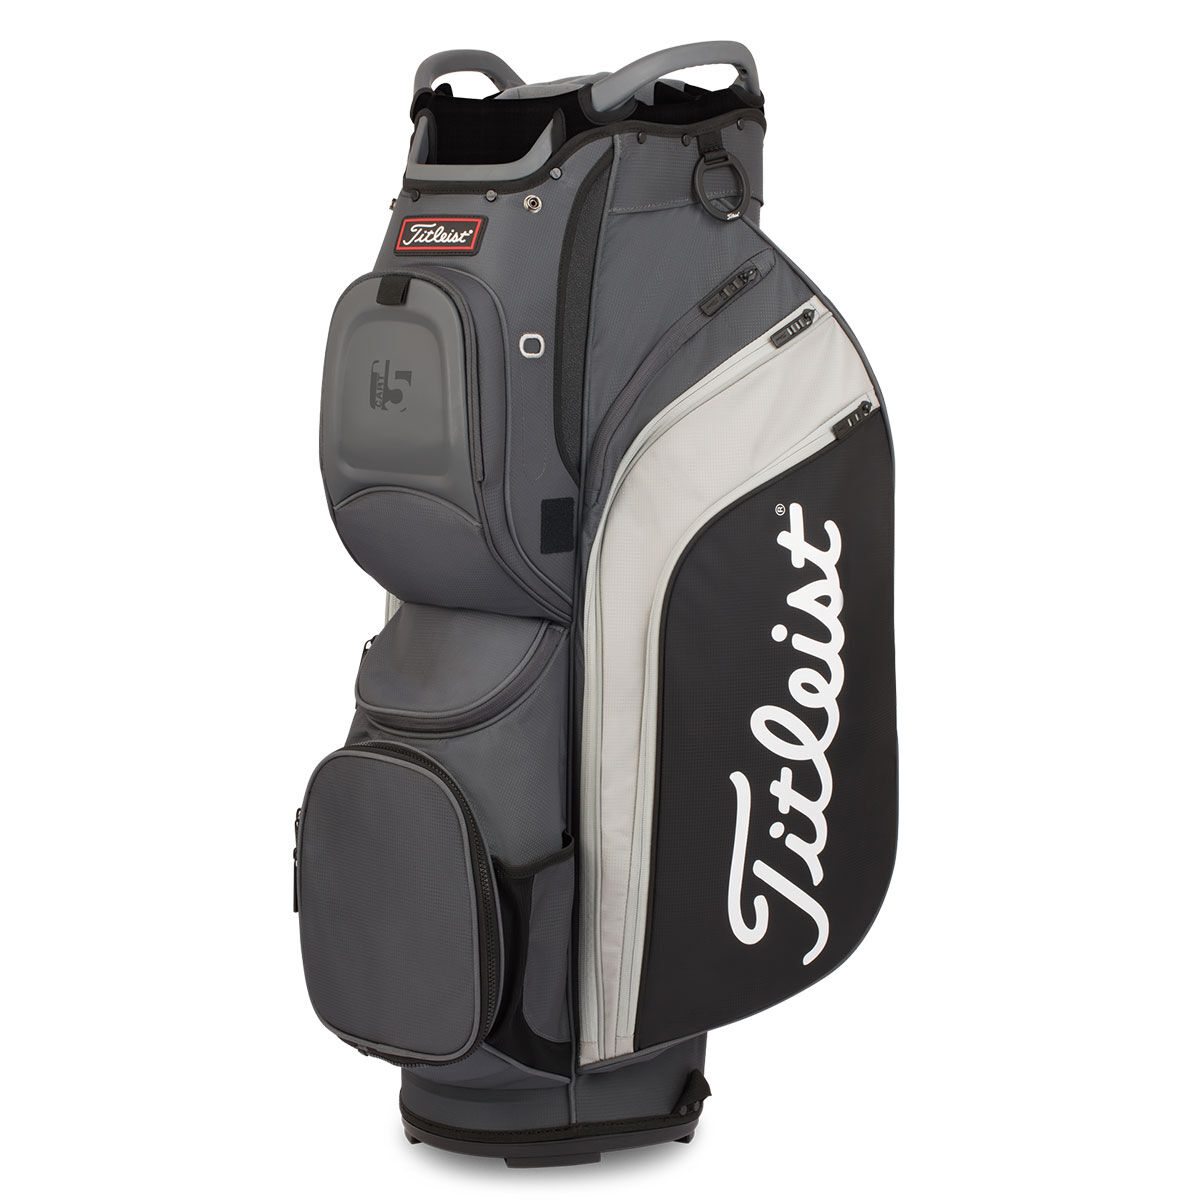 Titleist Charcoal Grey and Black Long Lasting 15 Golf Cart Bag | American Golf, One Size von Titleist